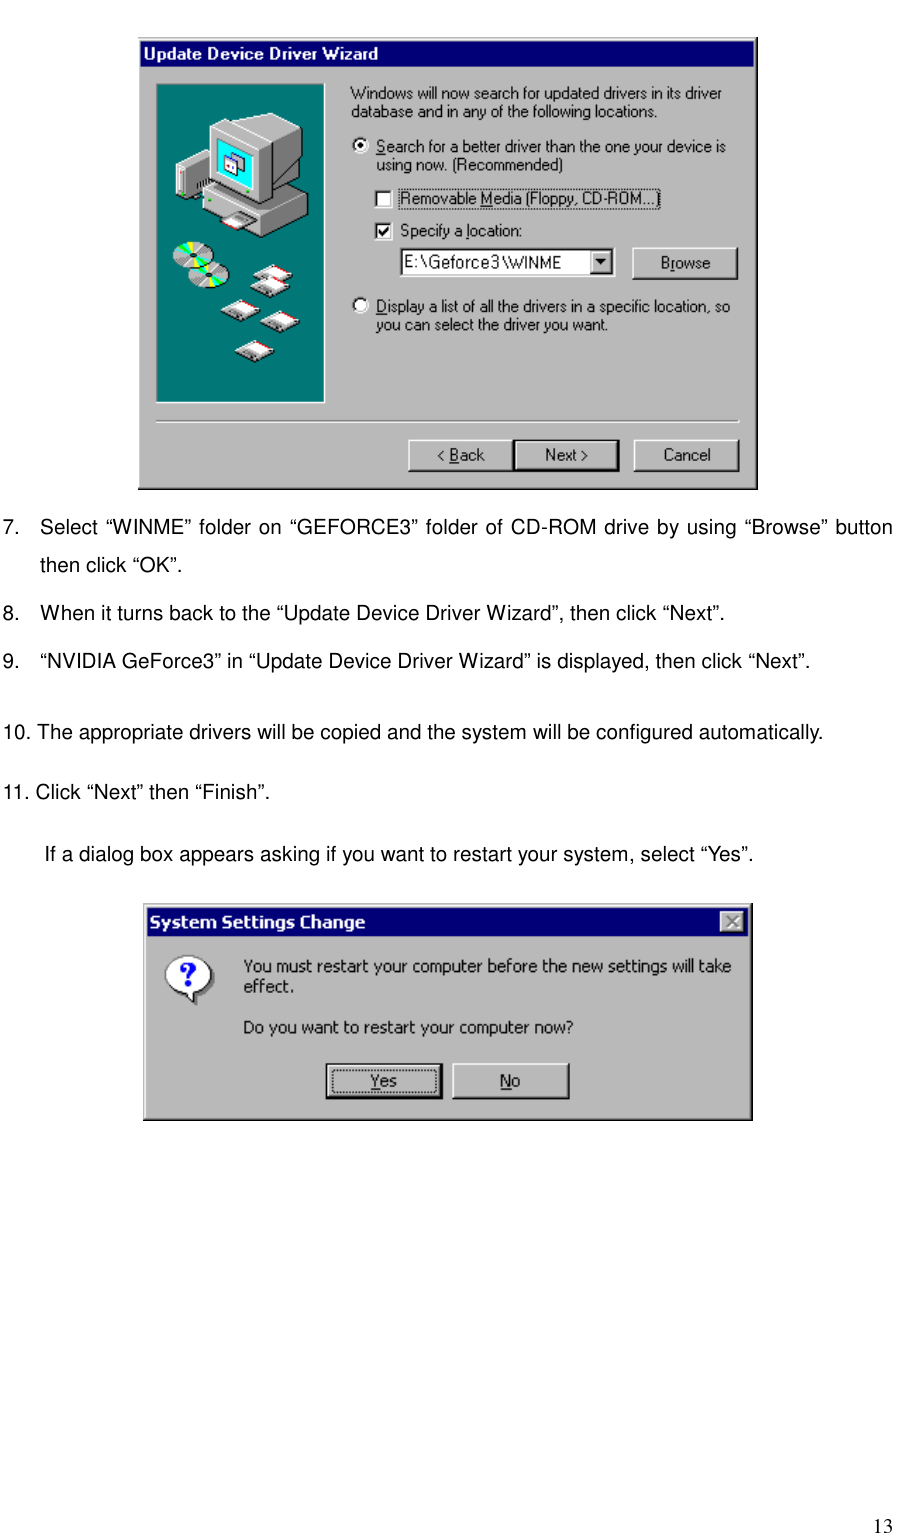     13  7.  Select “WINME” folder on “GEFORCE3” folder of CD-ROM drive by using “Browse” button then click “OK”.  8.  When it turns back to the “Update Device Driver Wizard”, then click “Next”.  9.  “NVIDIA GeForce3” in “Update Device Driver Wizard” is displayed, then click “Next”.   10. The appropriate drivers will be copied and the system will be configured automatically.  11. Click “Next” then “Finish”.    If a dialog box appears asking if you want to restart your system, select “Yes”.   